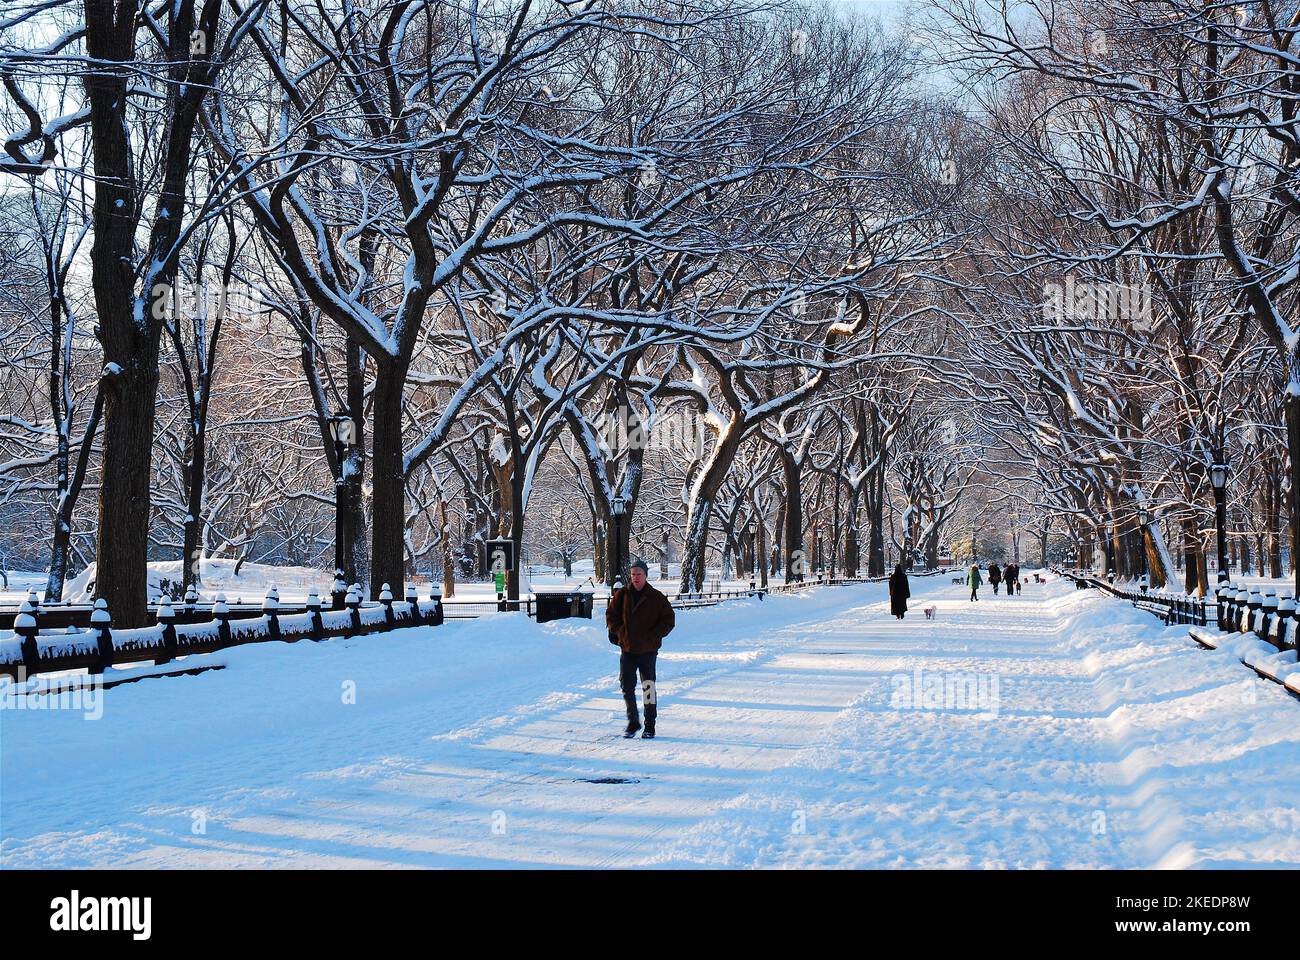 A few people brave the cold weather following a snow storm and walk through the Mall, a formal area of New York's Central Park Stock Photo